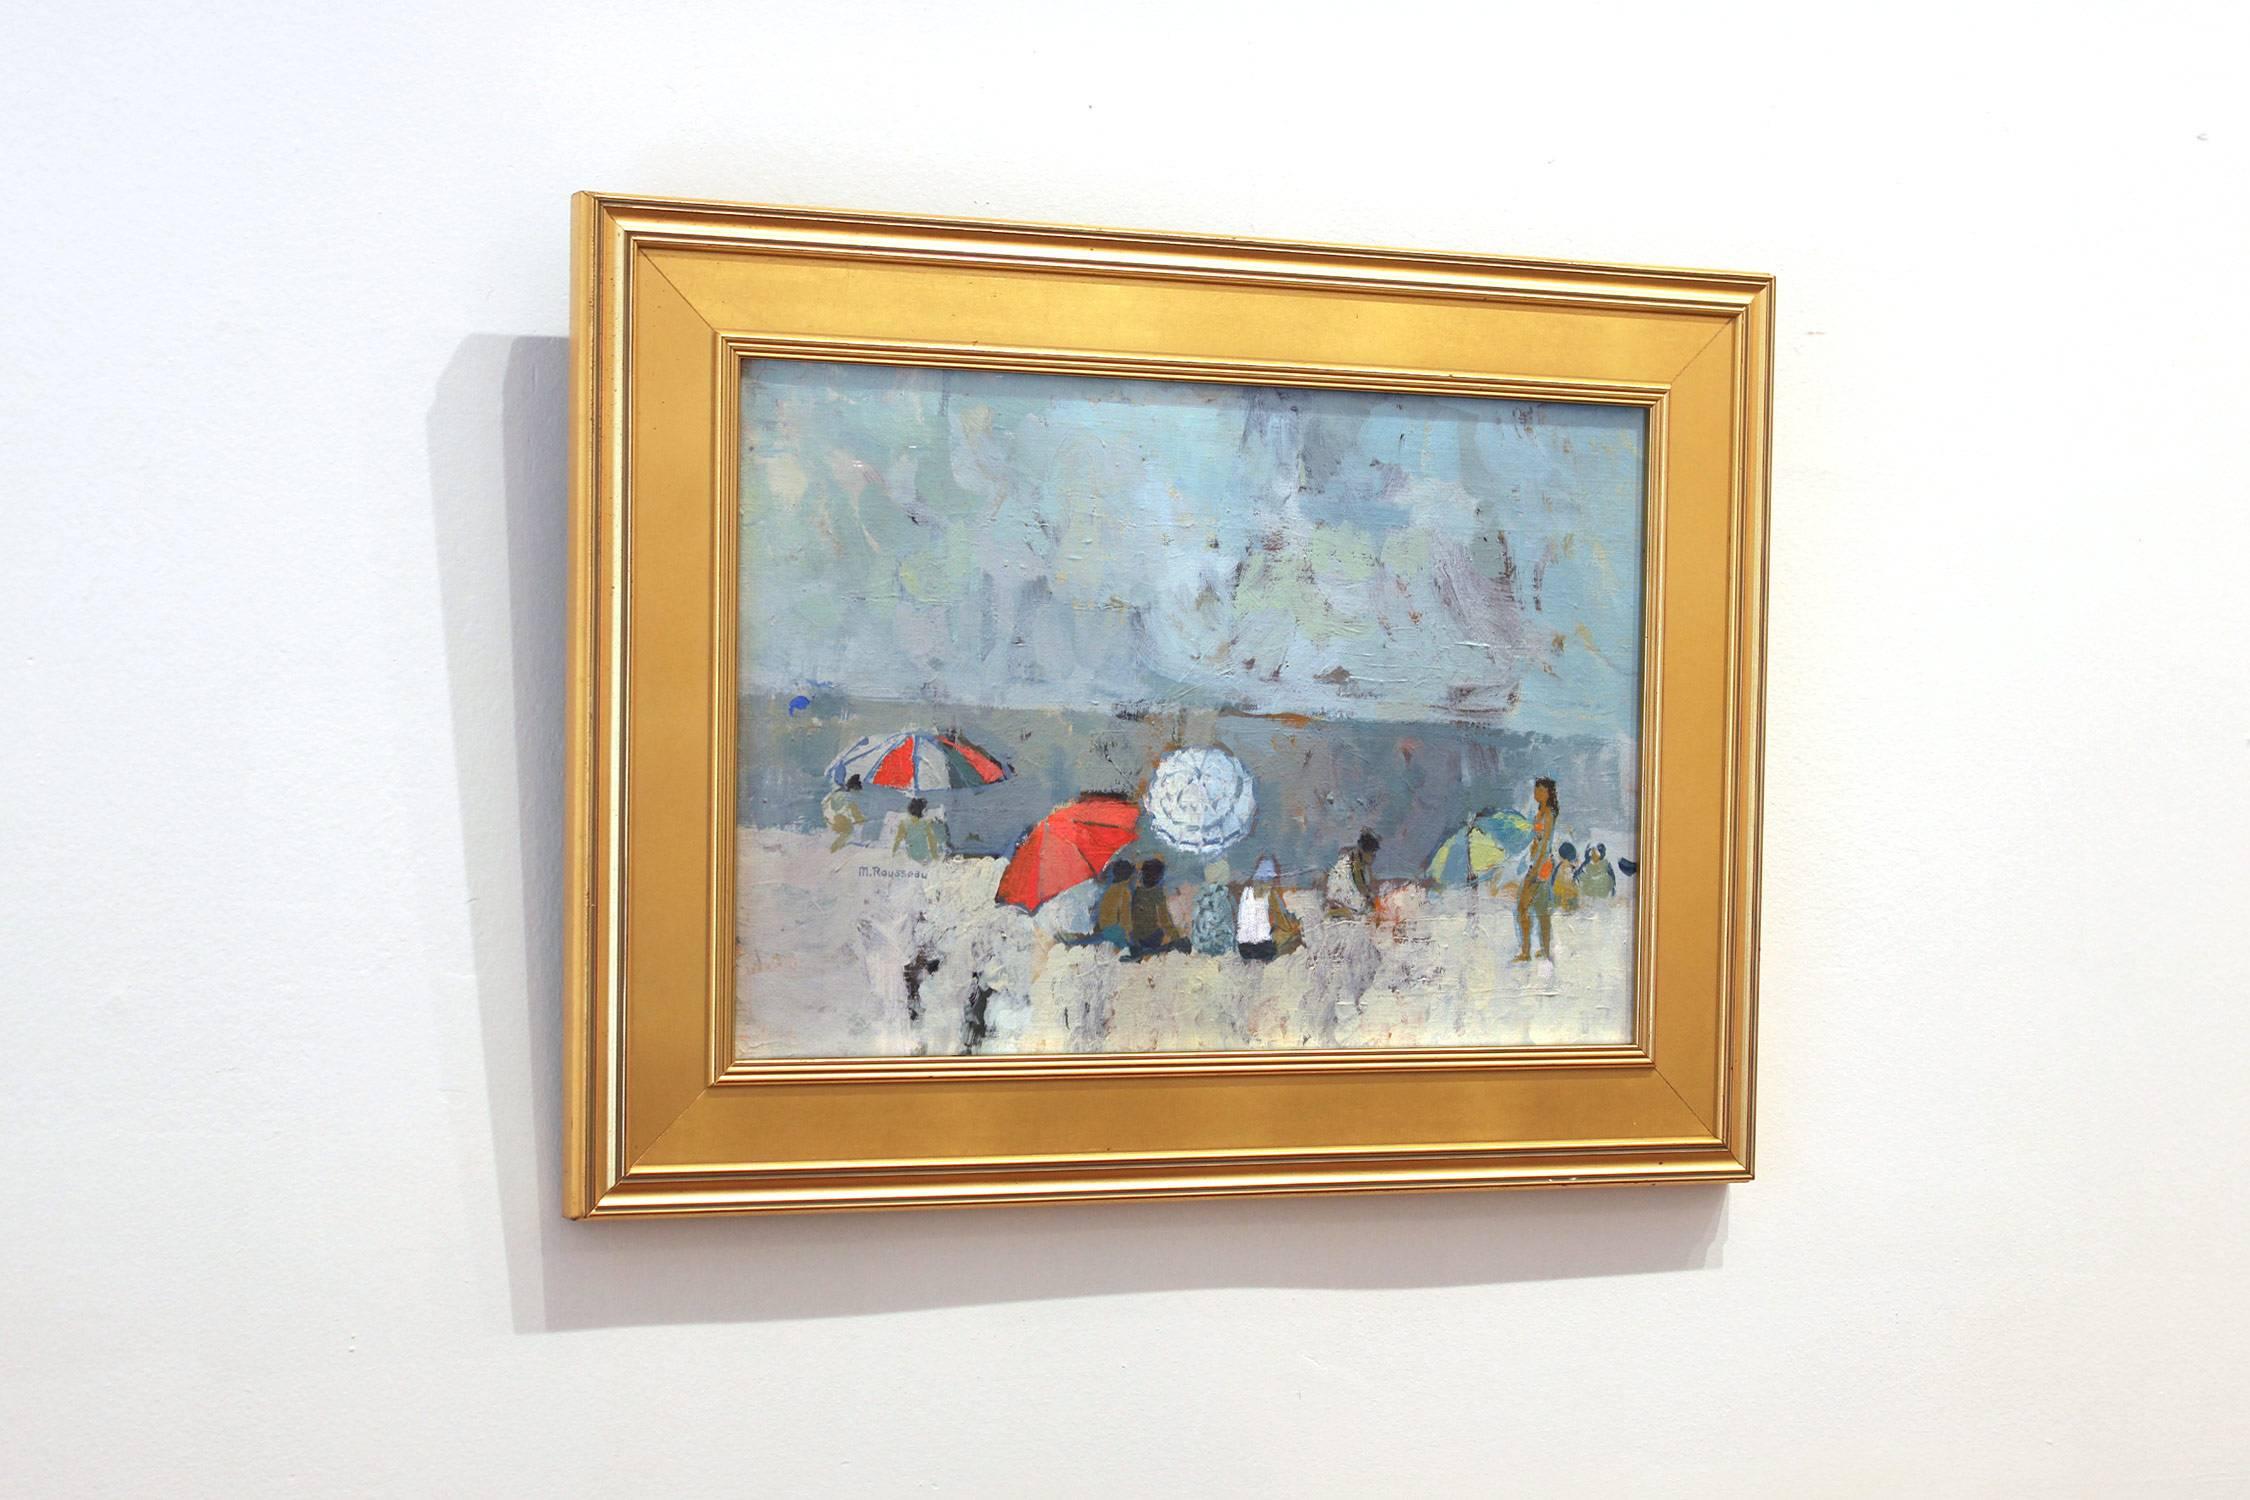 A wonderful impressionistic oil painting depicting a beach scene from the early 20th Century. This piece is part of Rousseau's later works where she used a loser technique in her execution. There are many figures placed about with beach umbrellas. A